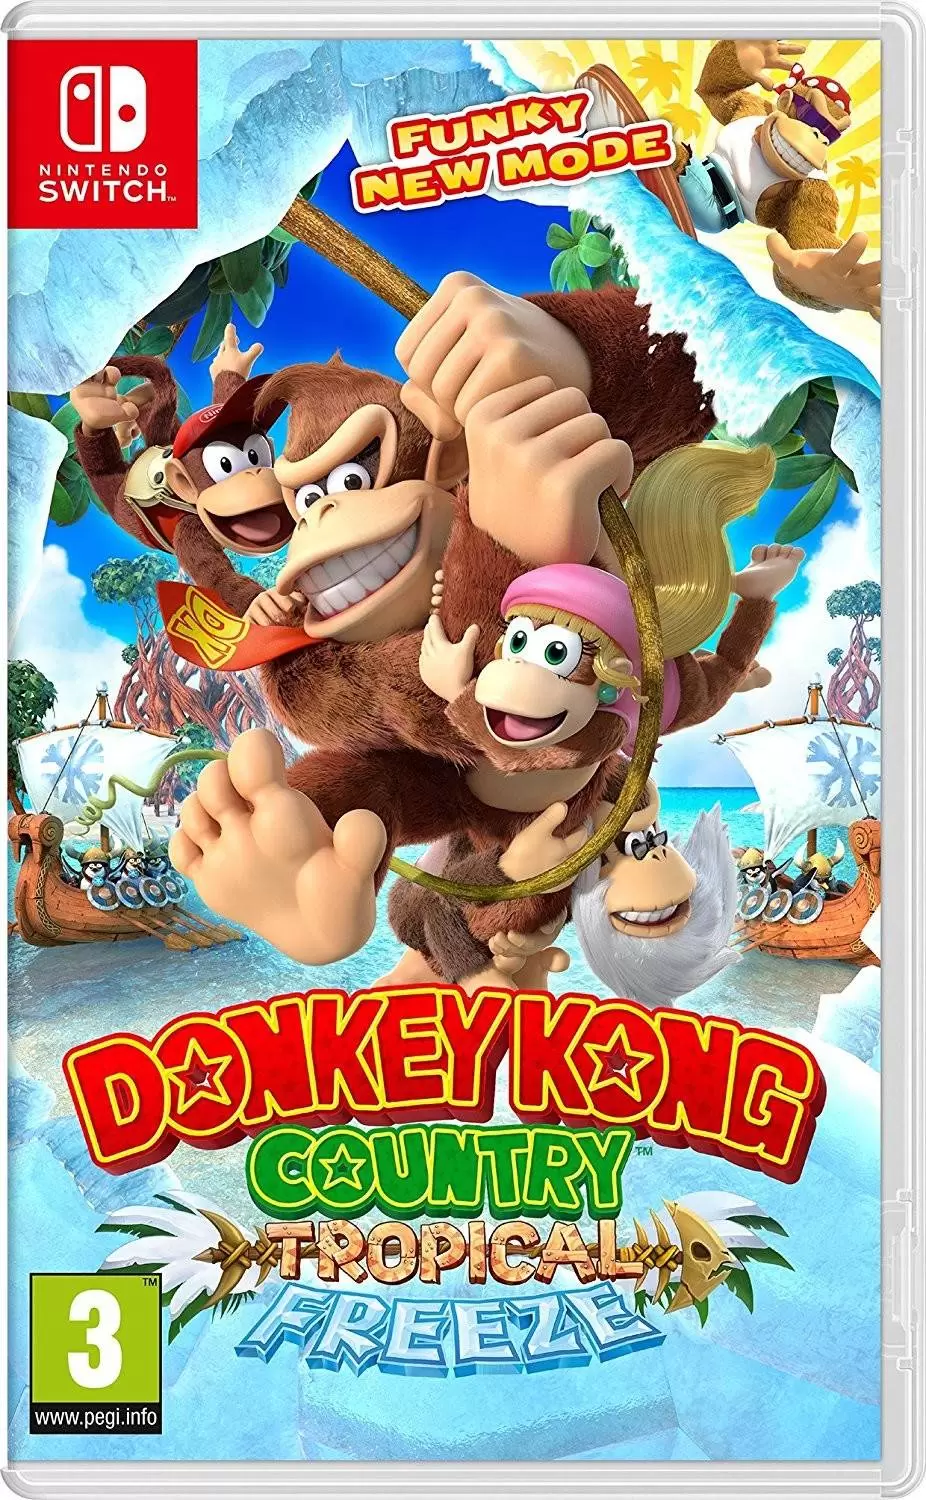 Nintendo Switch Games - Donkey Kong Country: Tropical Freeze